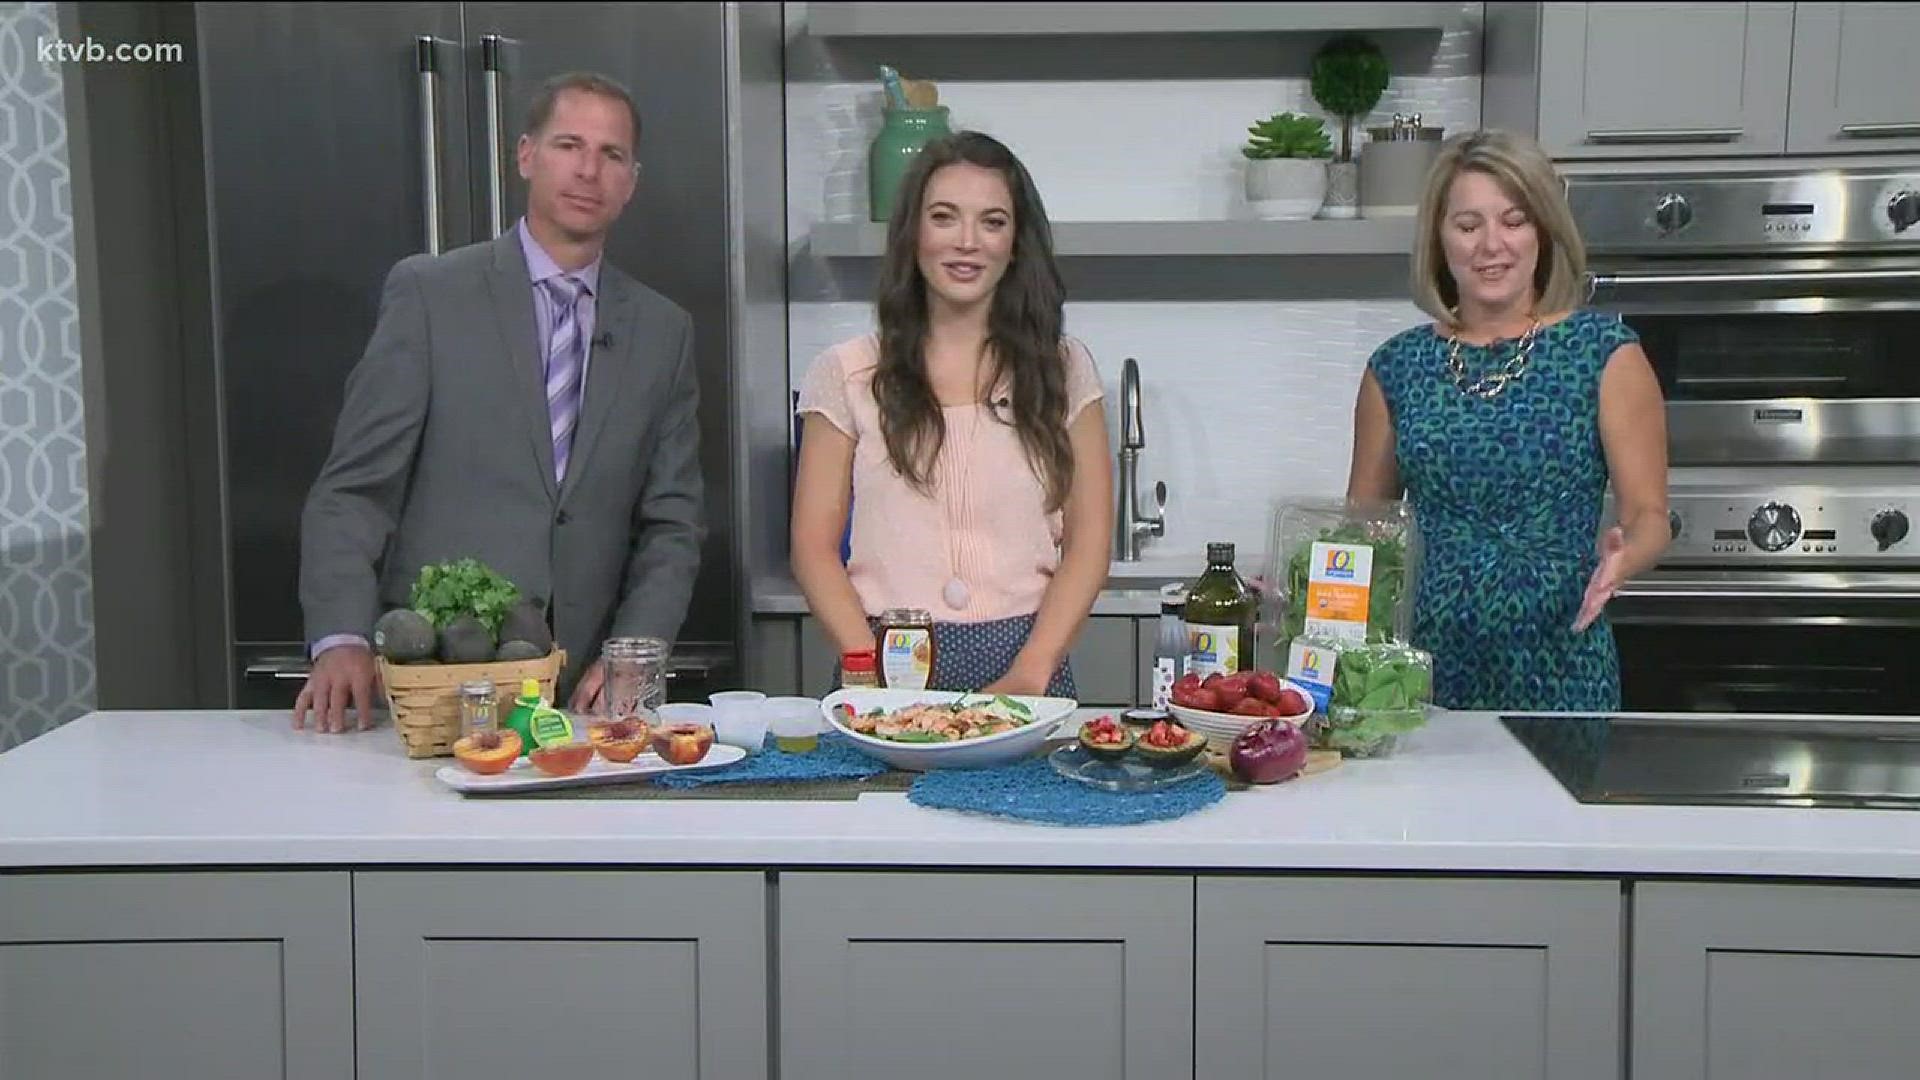 Molly Tevis shows us some produce you can put on the grill.